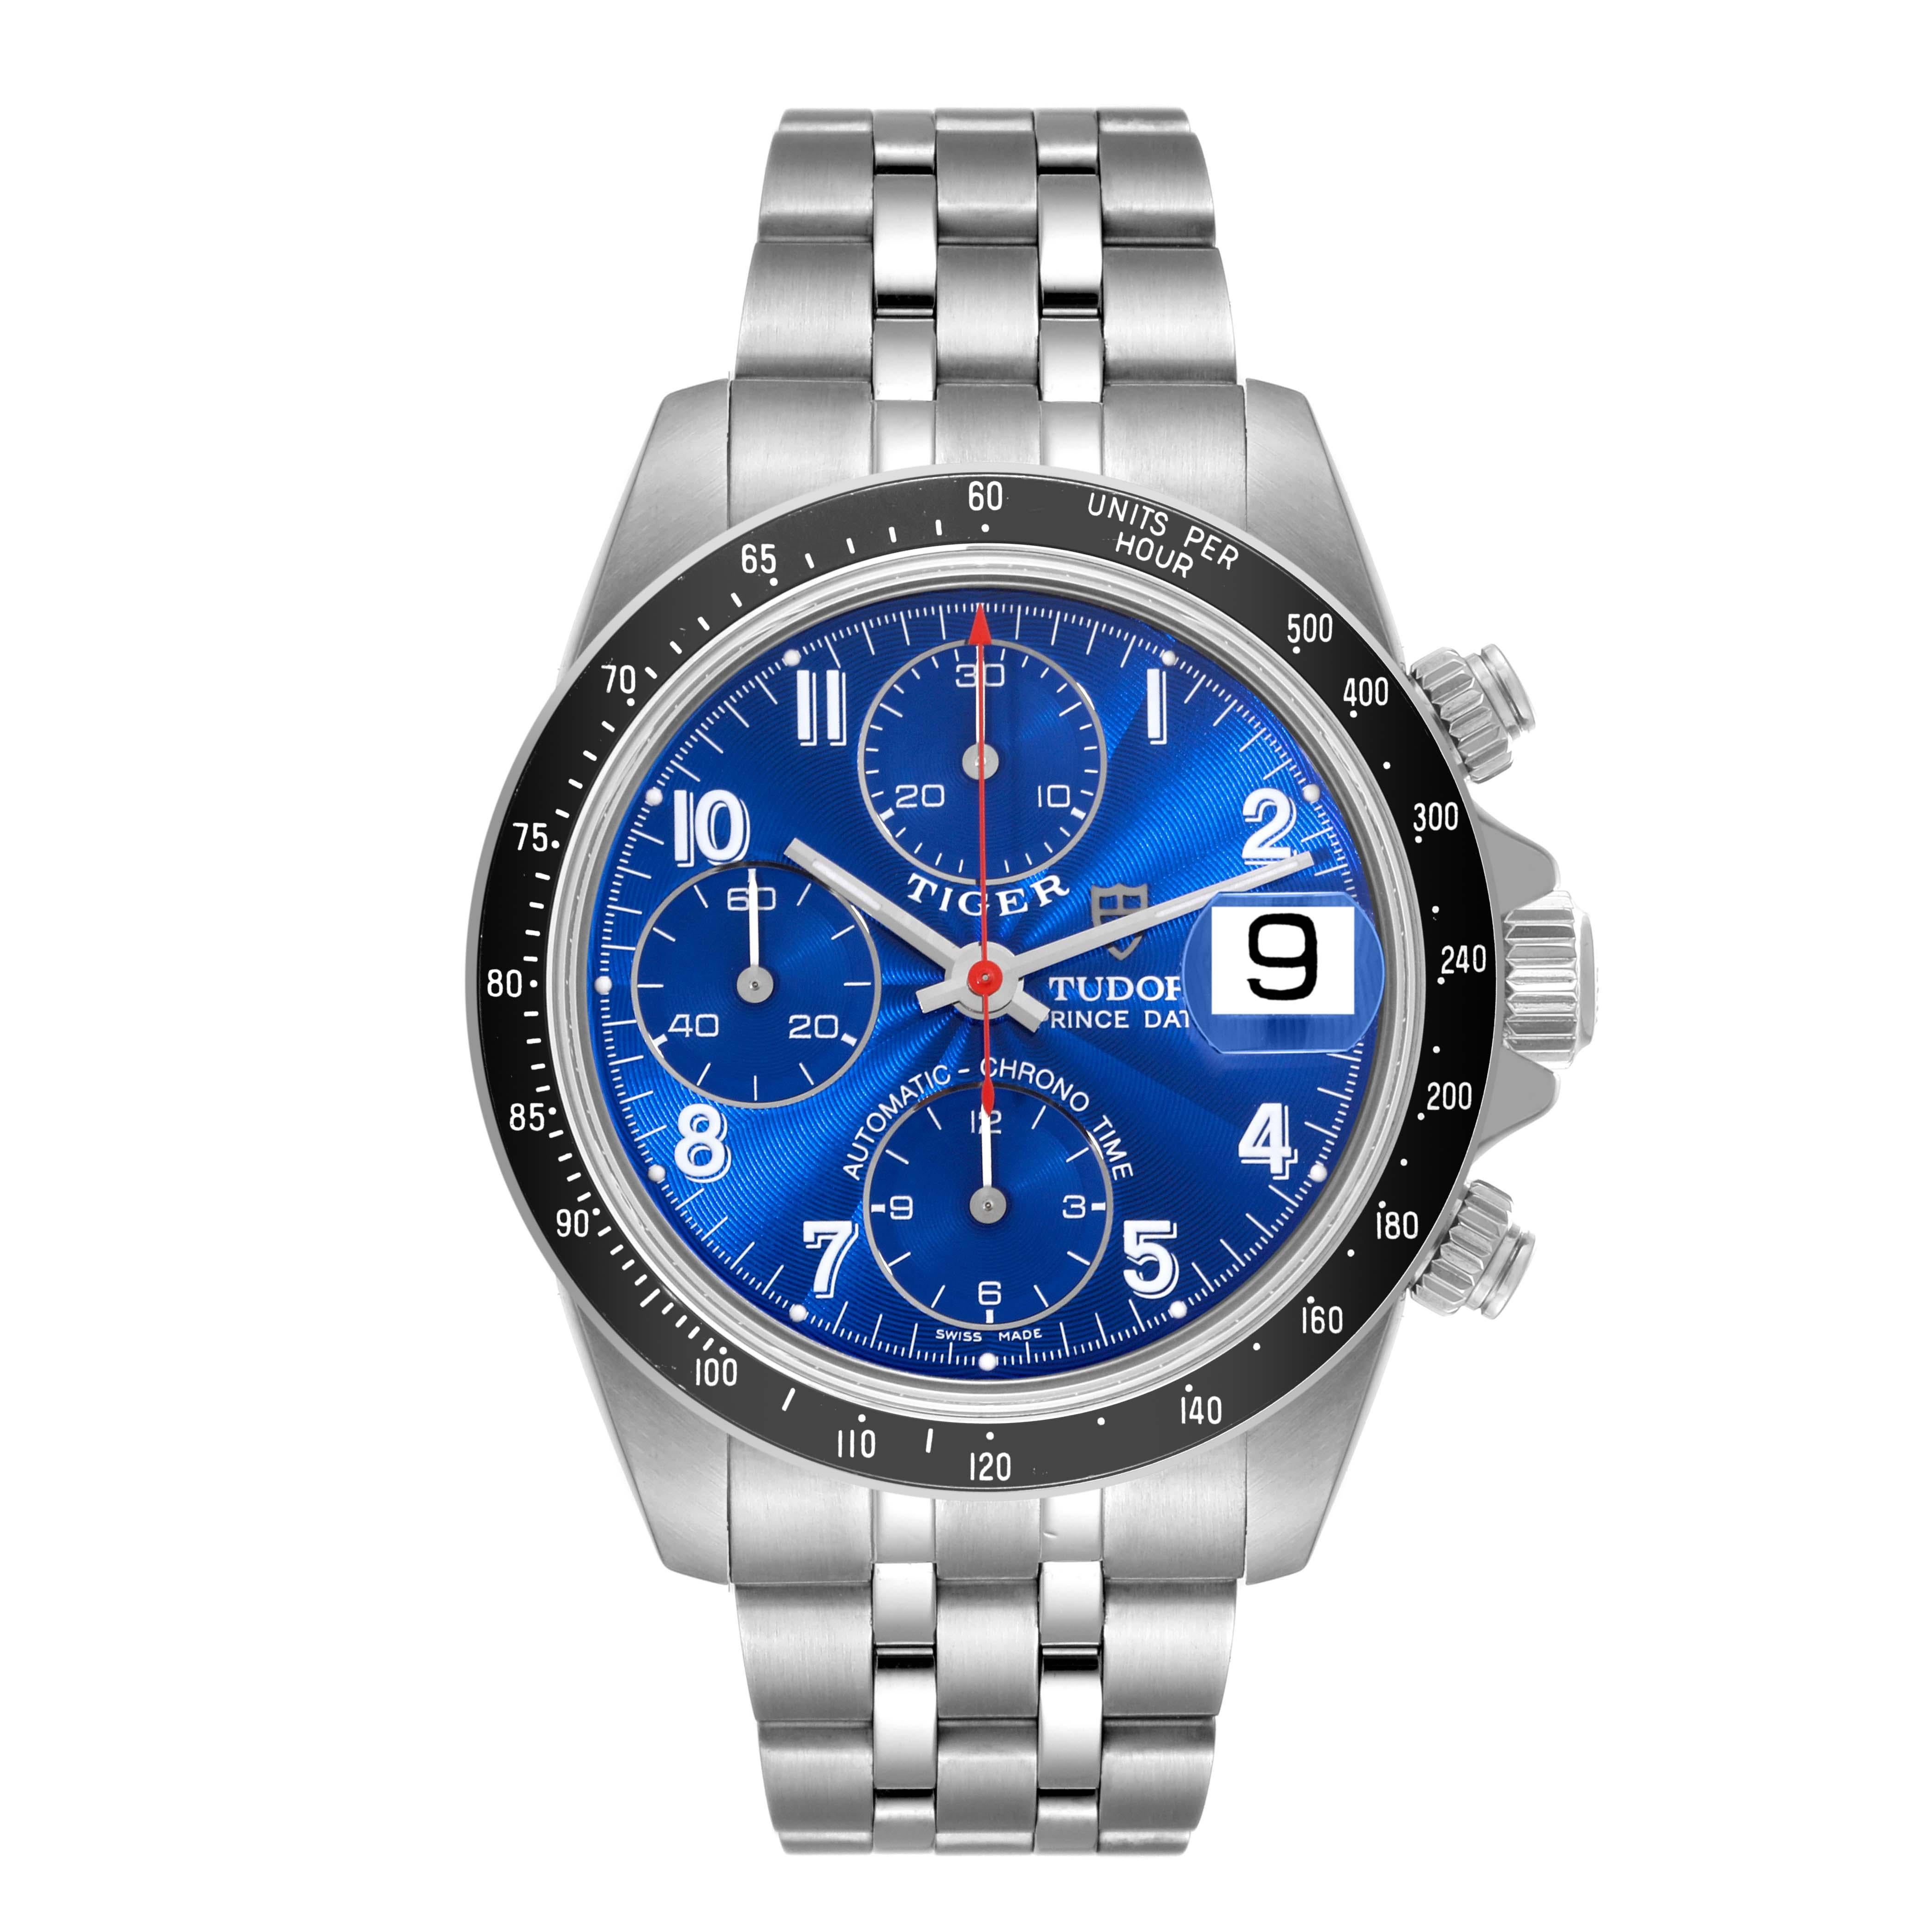 Tudor Tiger Woods Prince Blue Dial Chronograph Steel Mens Watch 79260. Automatic self-winding movement with chronograph function. Stainless steel oyster case 40.0 mm in diameter. Tudor logo on a crown. Black tachometer bezel. Scratch resistant